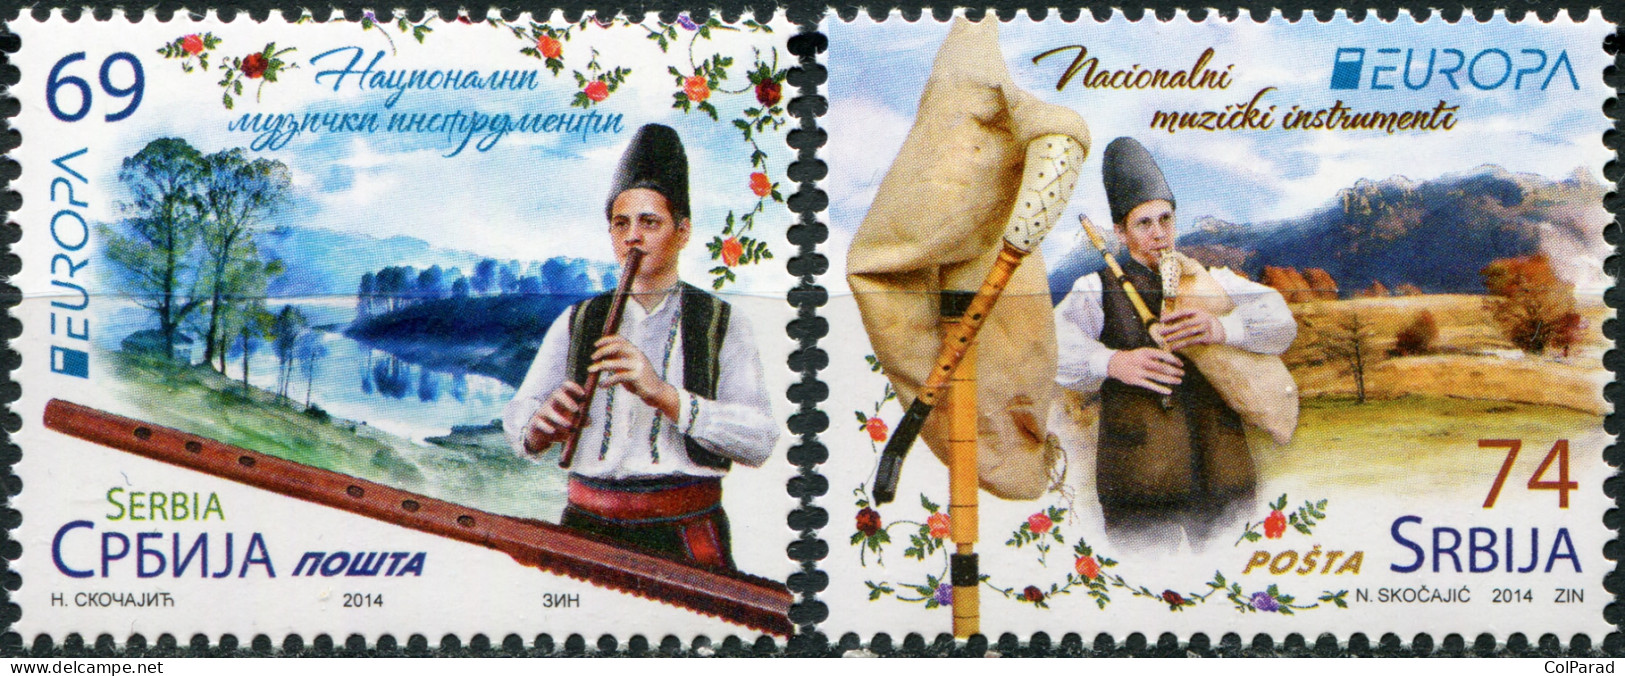 SERBIA - 2014 - SET OF 2 STAMPS MNH ** - Musical Instruments - Serbia